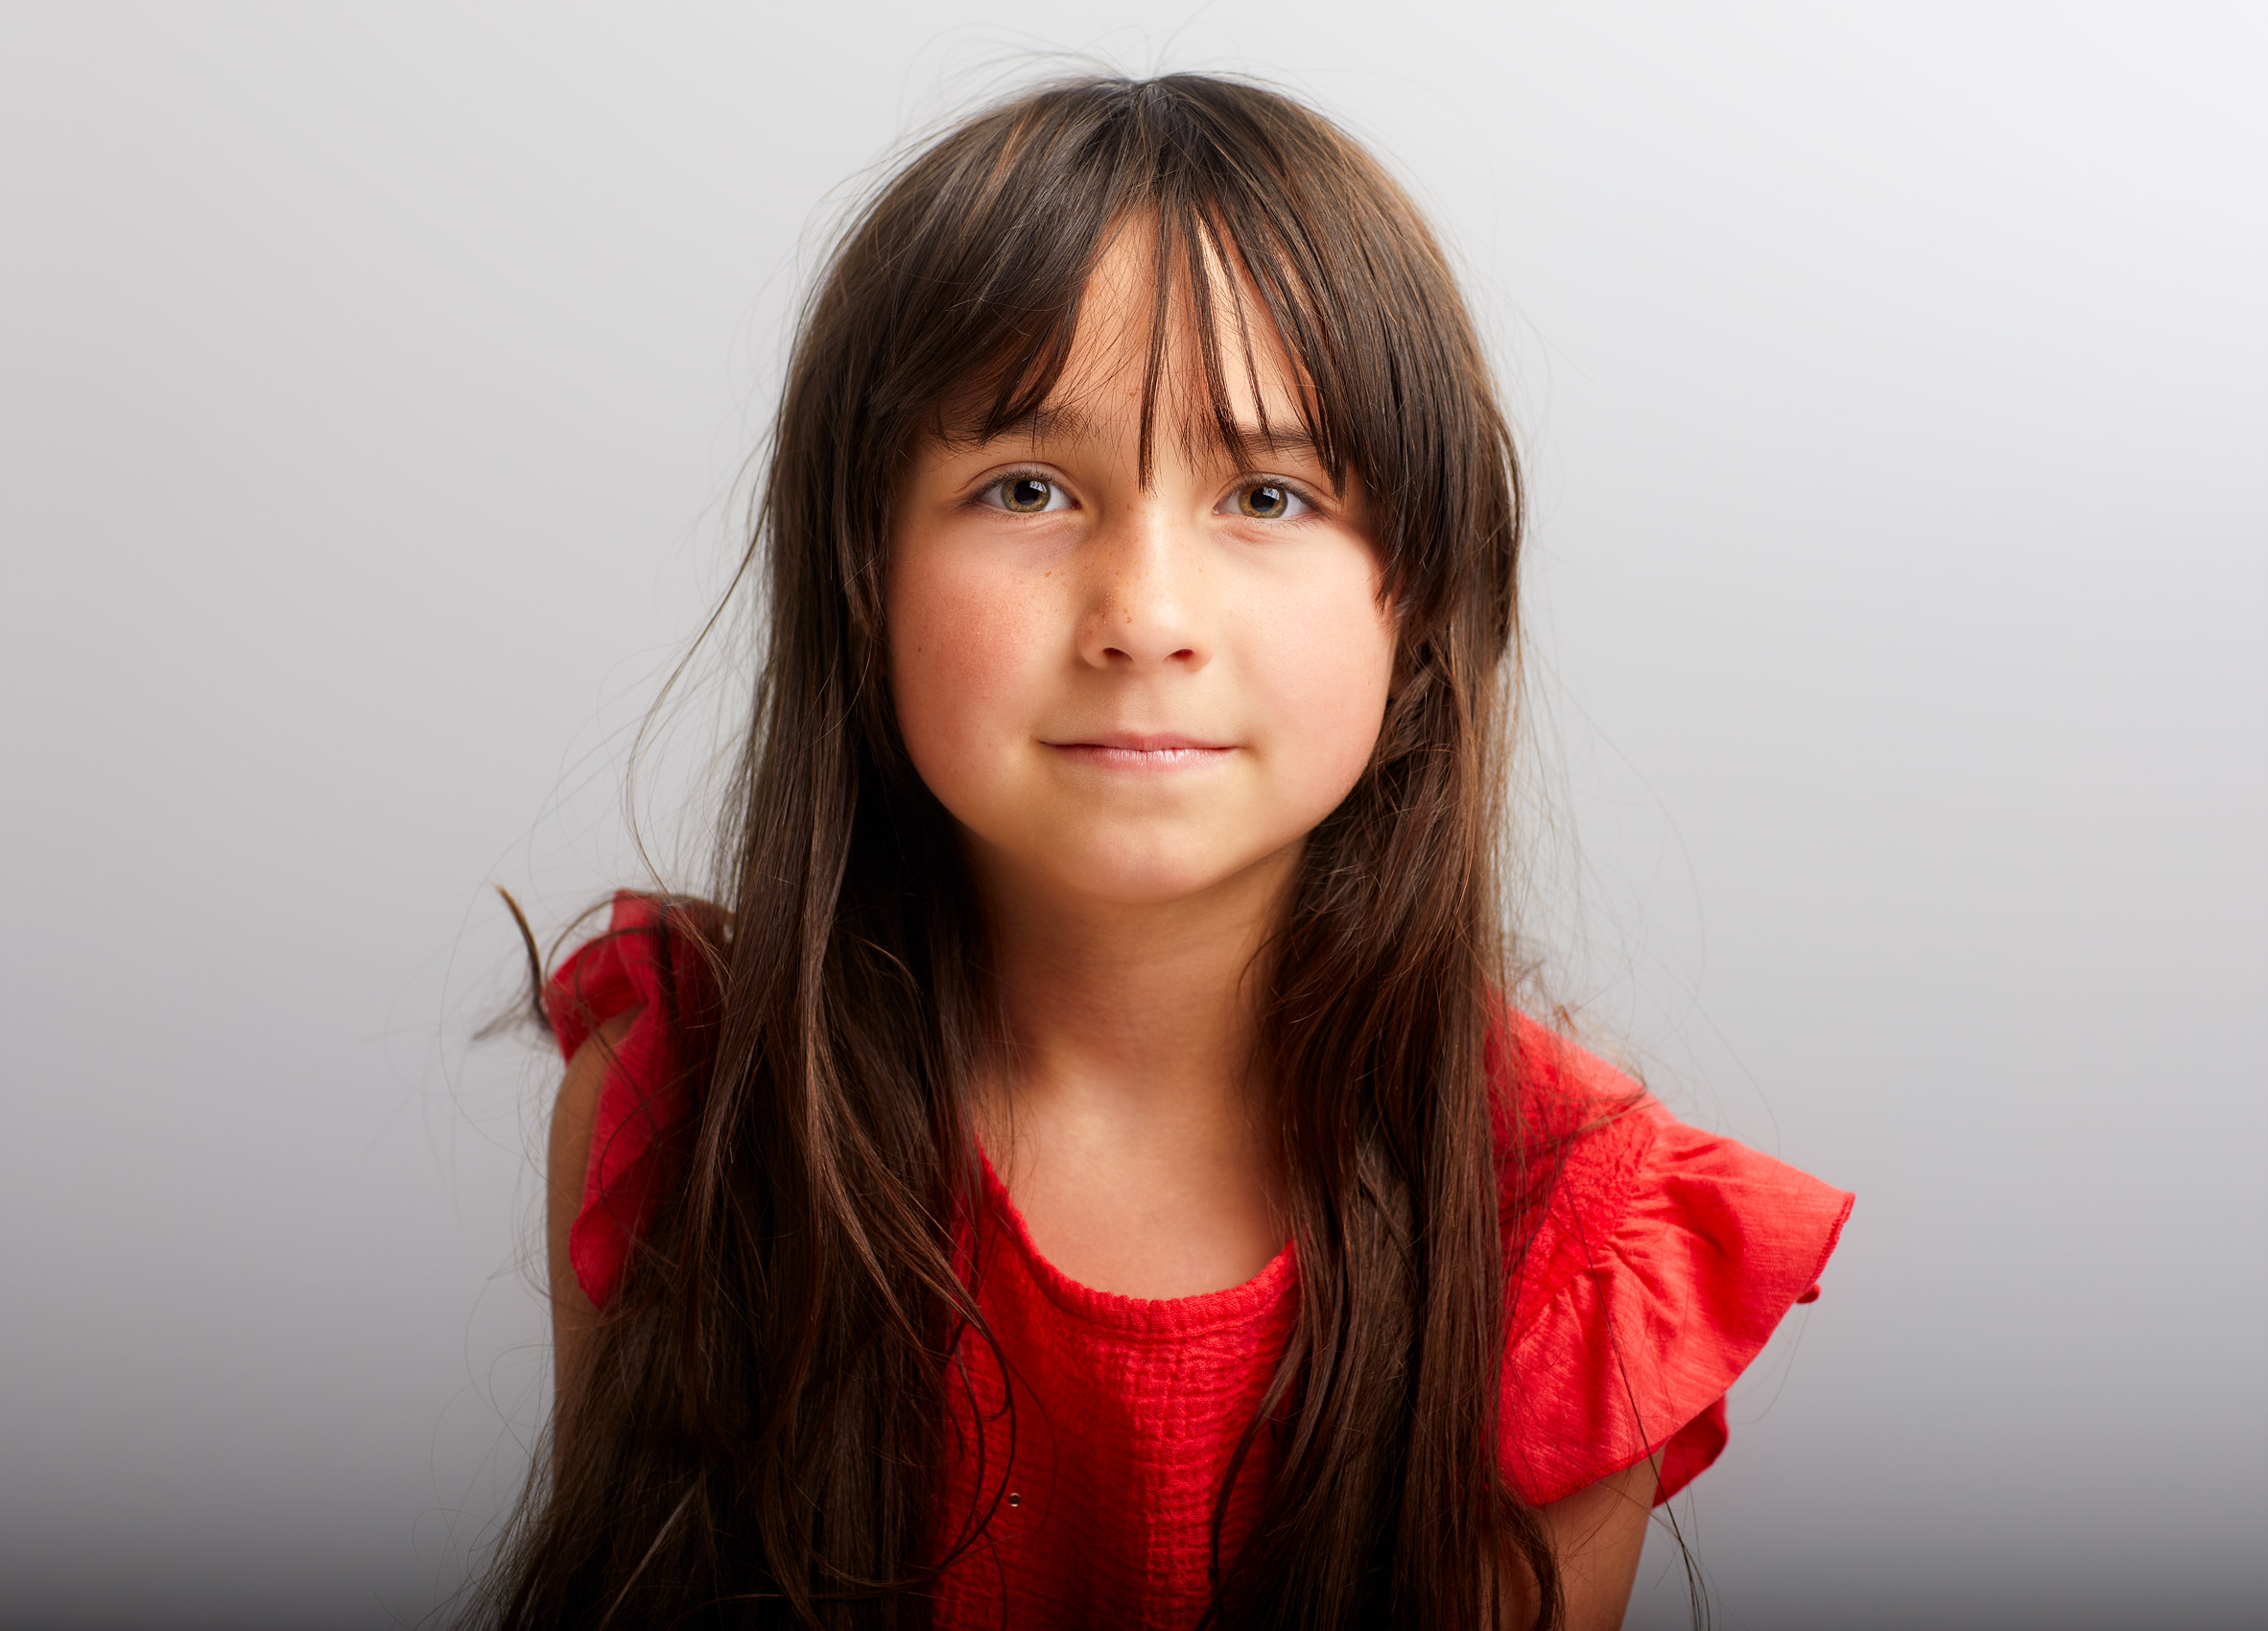 Young girl portrait photography